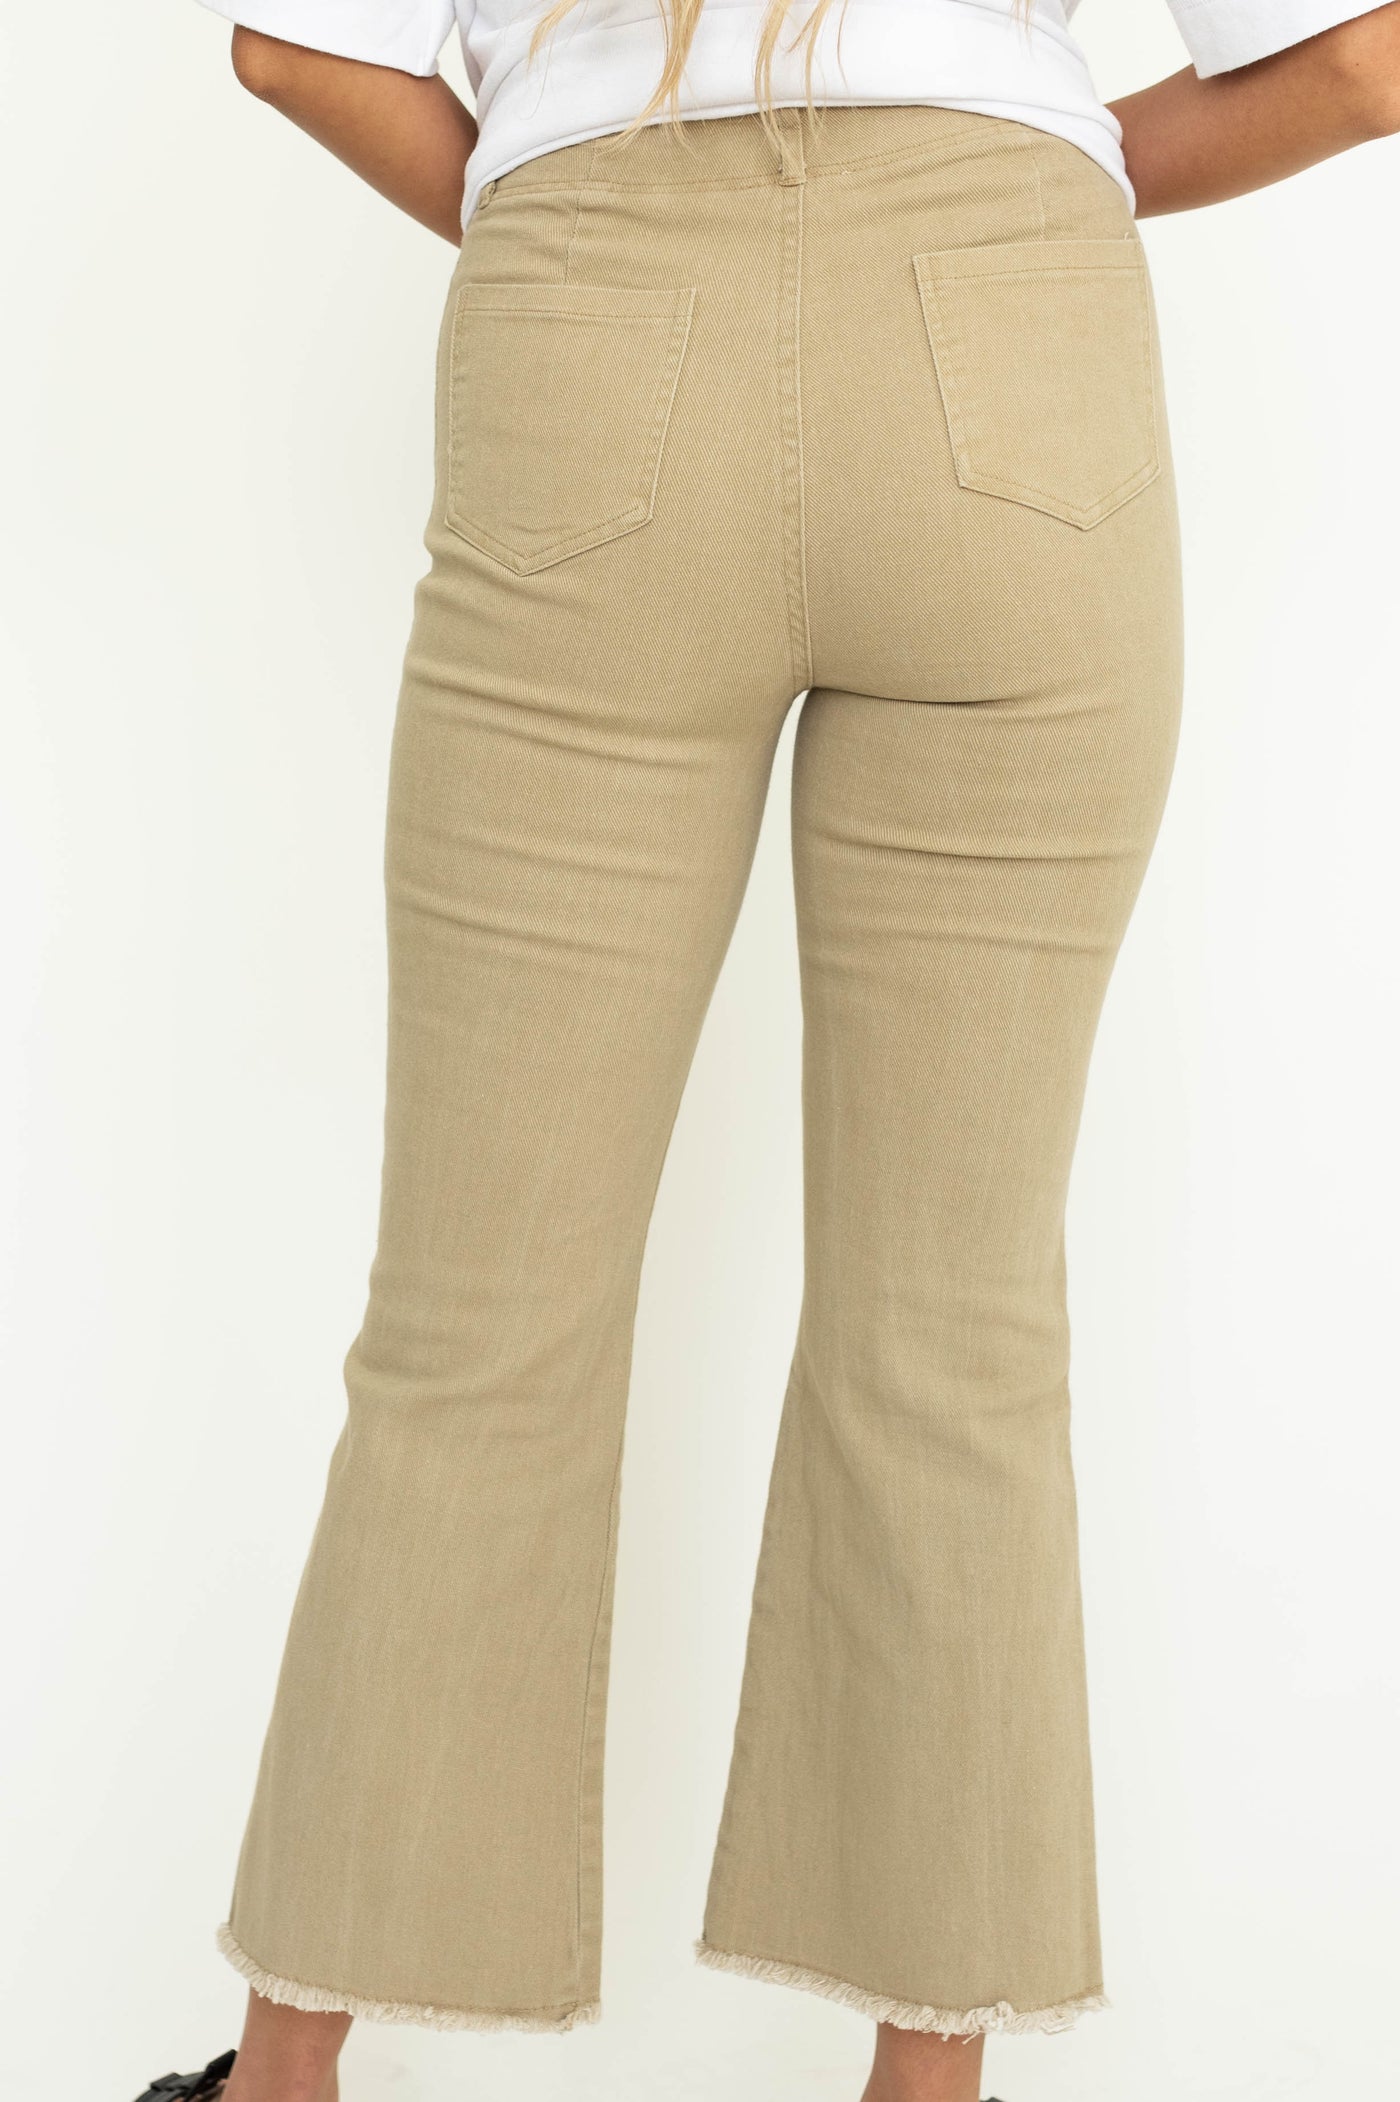 Back view of tan straight leg frayed edge, ankle length pants